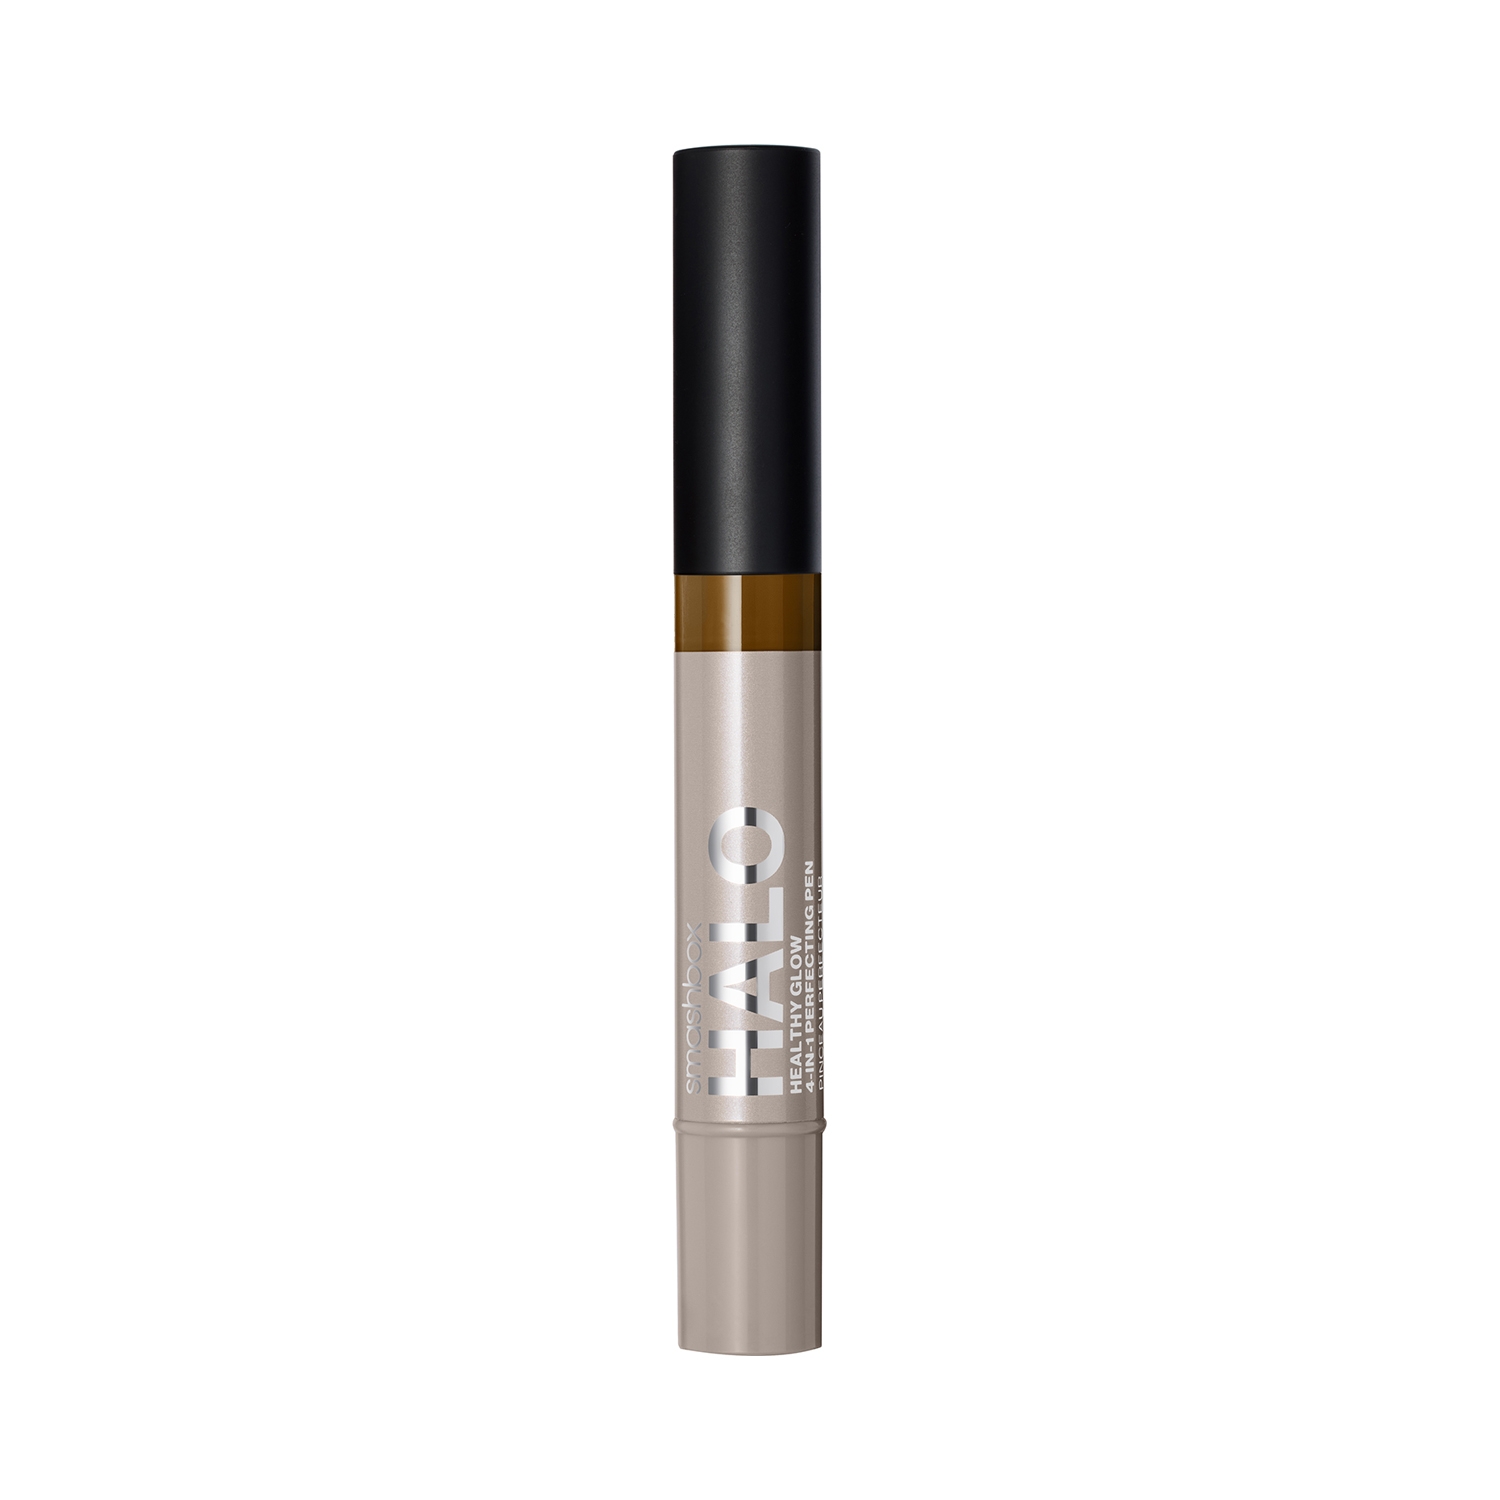 Smashbox | Smashbox Halo Healthy Glow 4-In-1 Perfecting Concealer Pen - D30W (3.5ml)